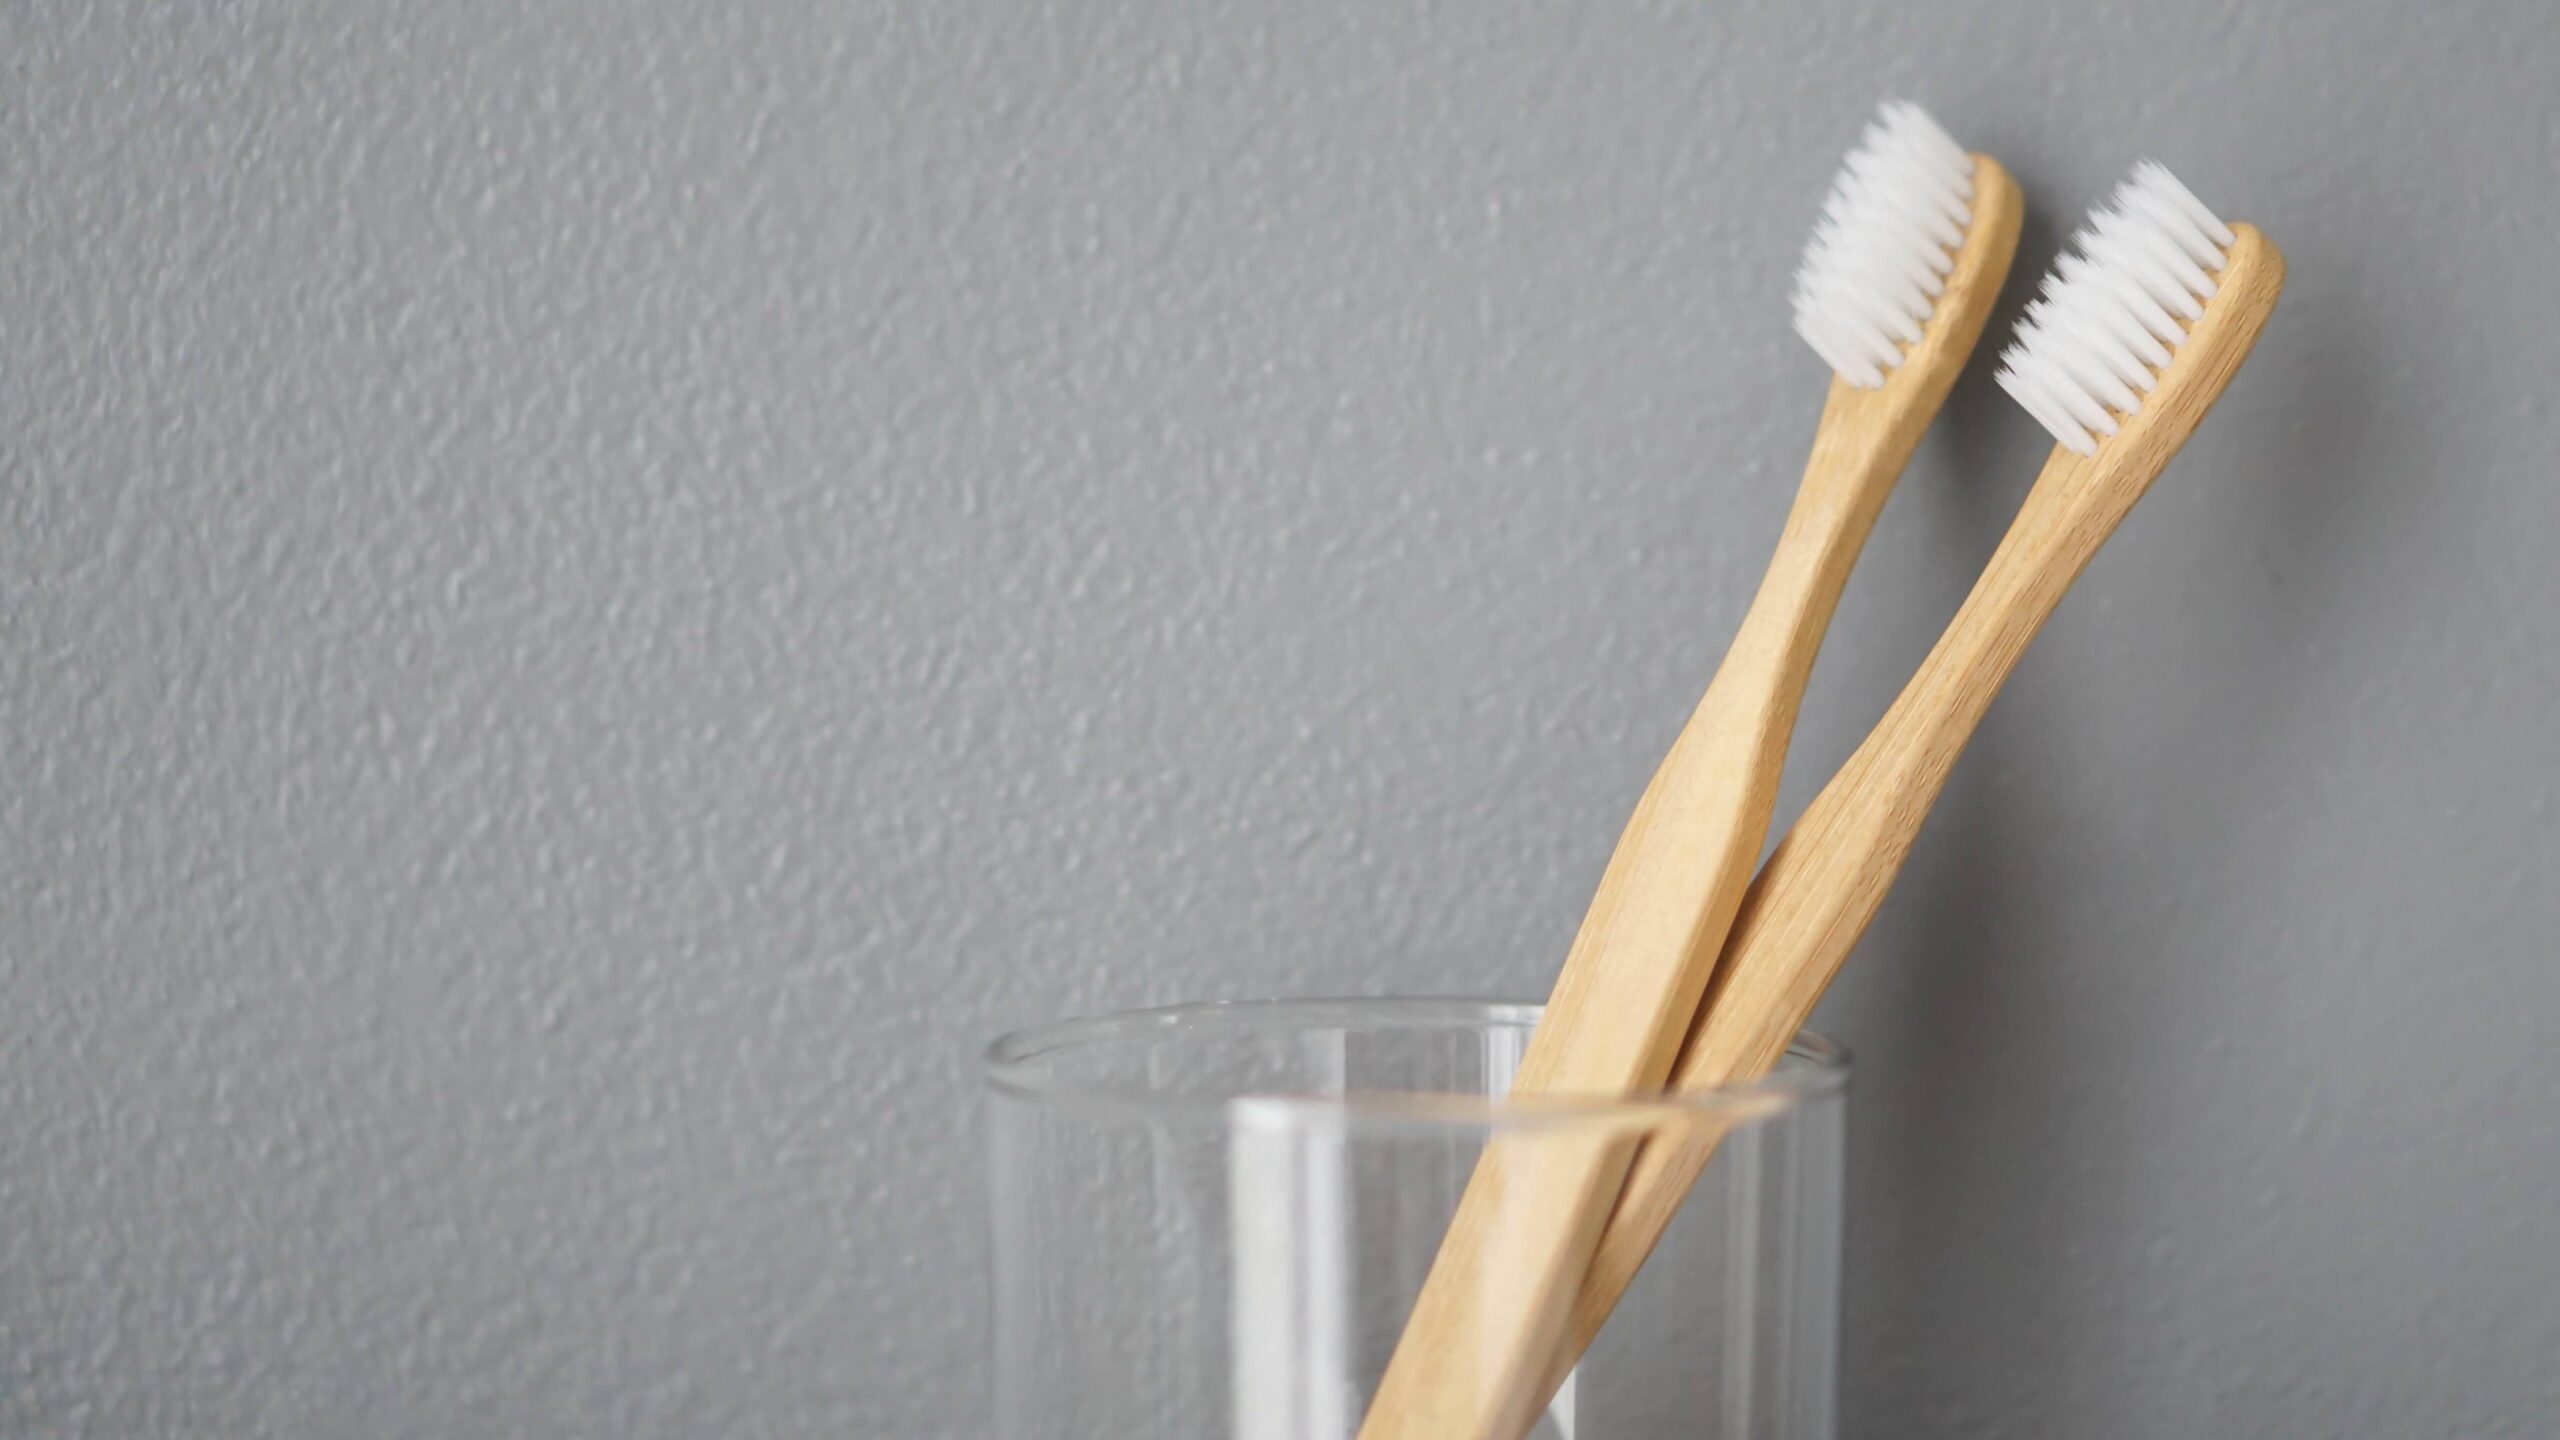 Close up wooden toothbrush in glass with grey background, selective focus